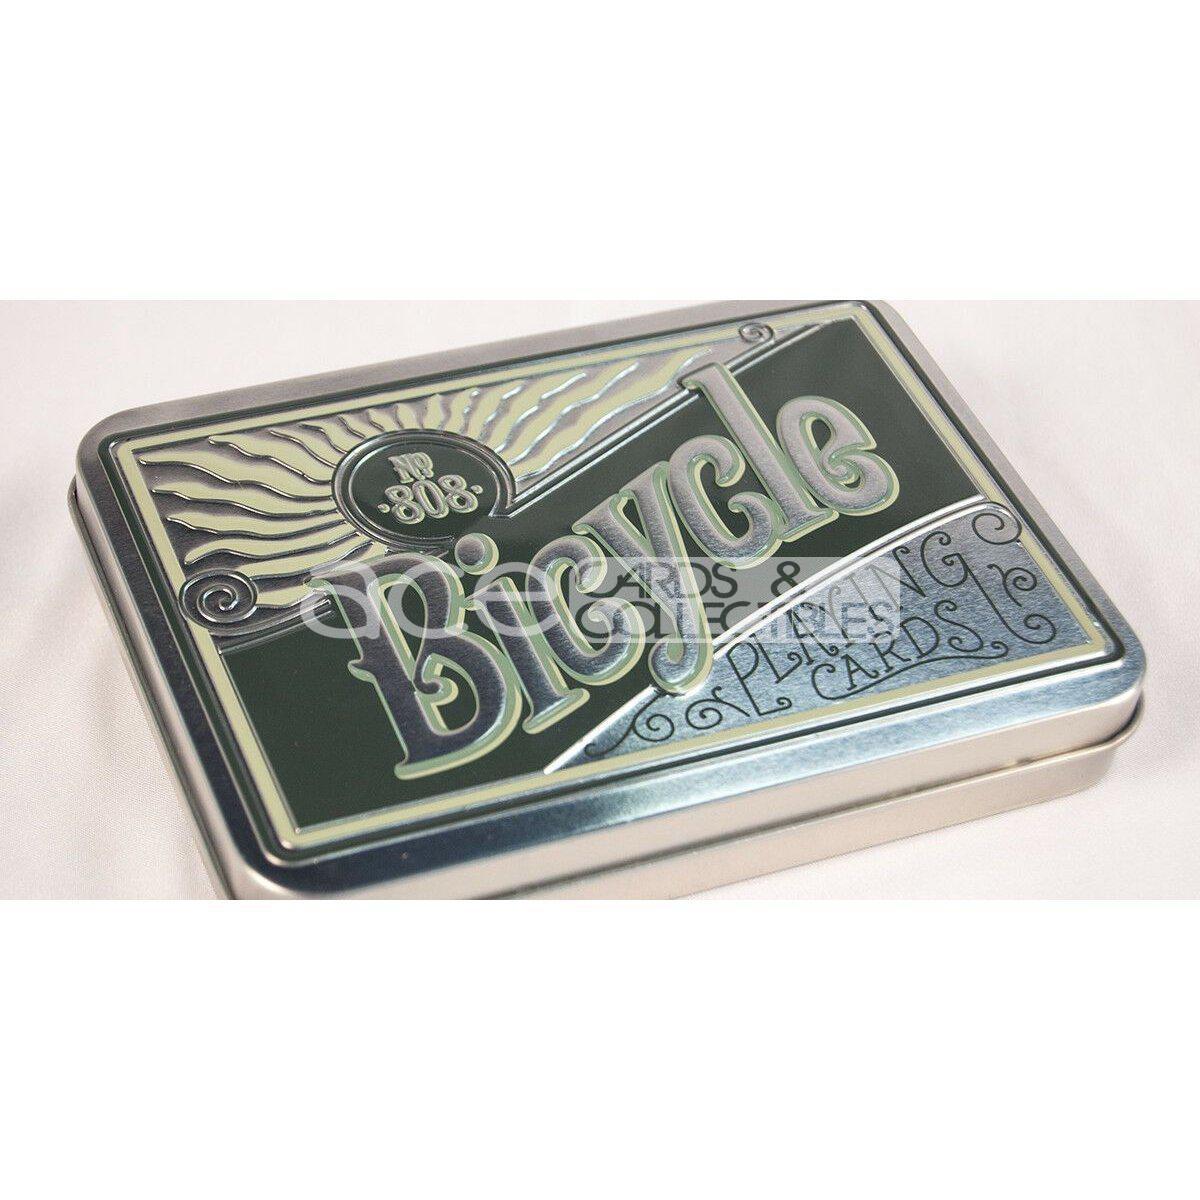 Bicycle Retro Tin Collector Tin 2 Premium Deck (Autocycle Green &amp; Purple) Playing Cards-United States Playing Cards Company-Ace Cards &amp; Collectibles